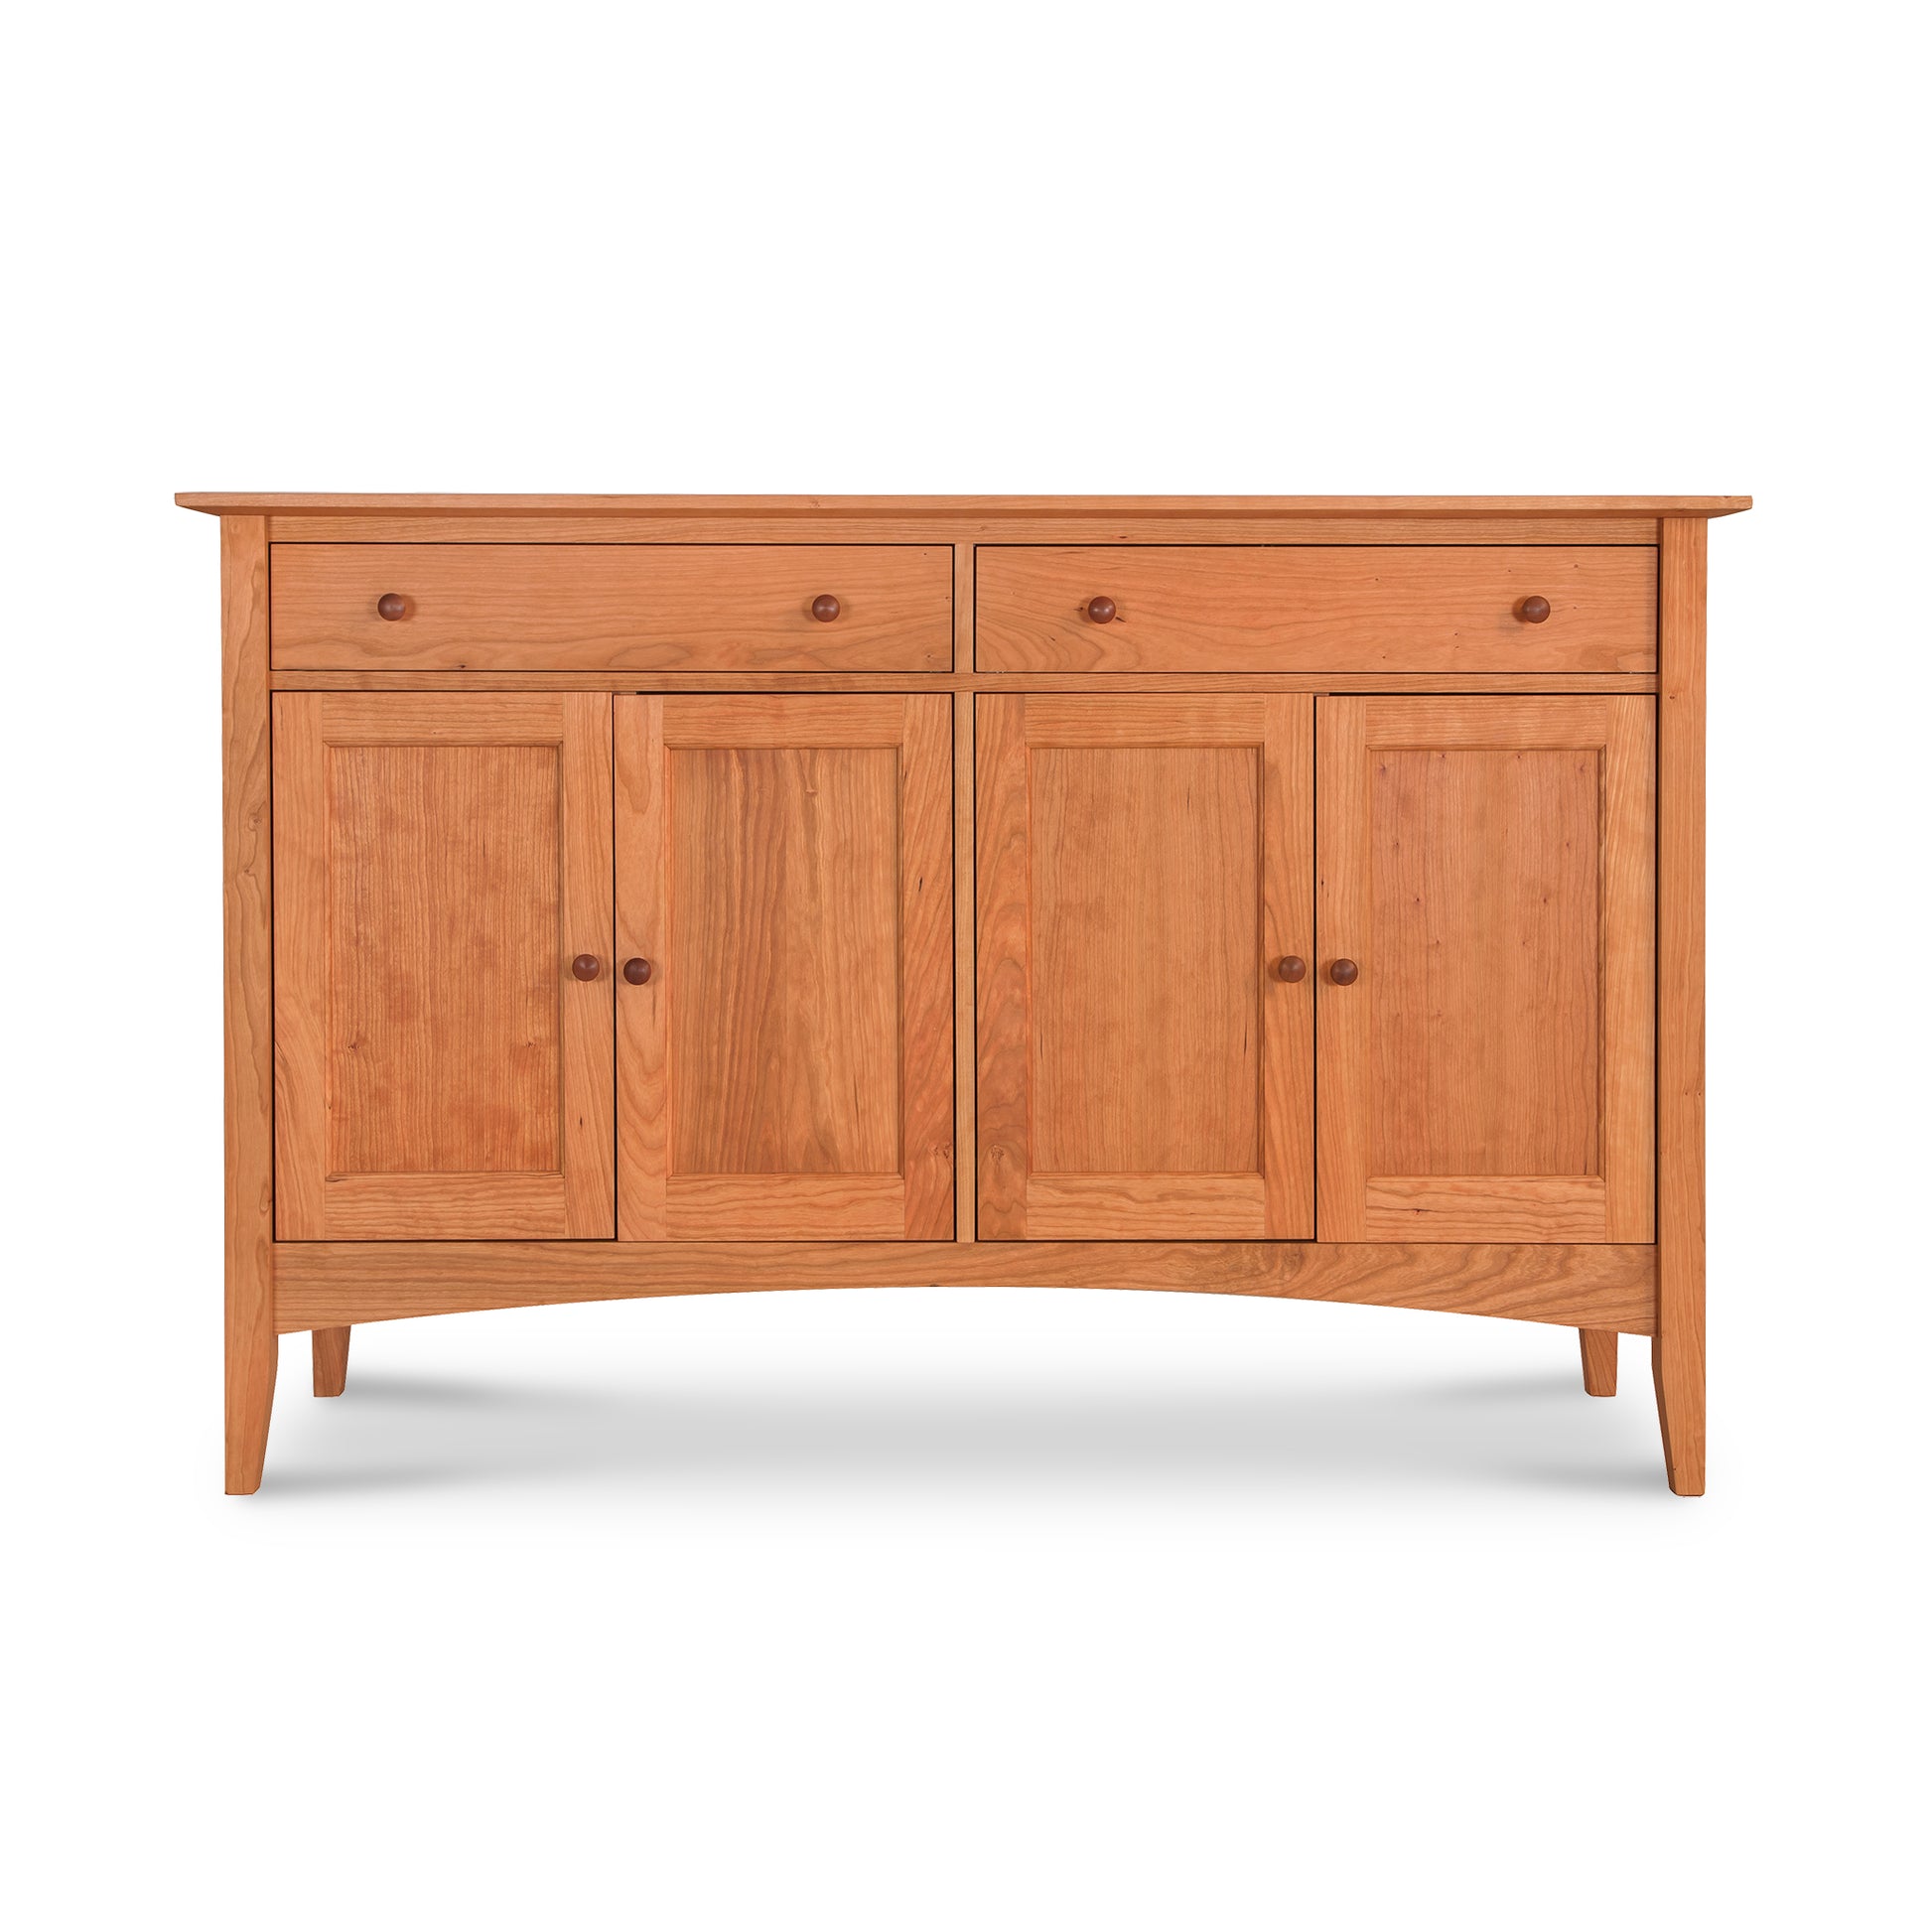 A solid hardwood Maple Corner Woodworks American Shaker Large Sideboard with two drawers and three cabinet doors, on a white background.